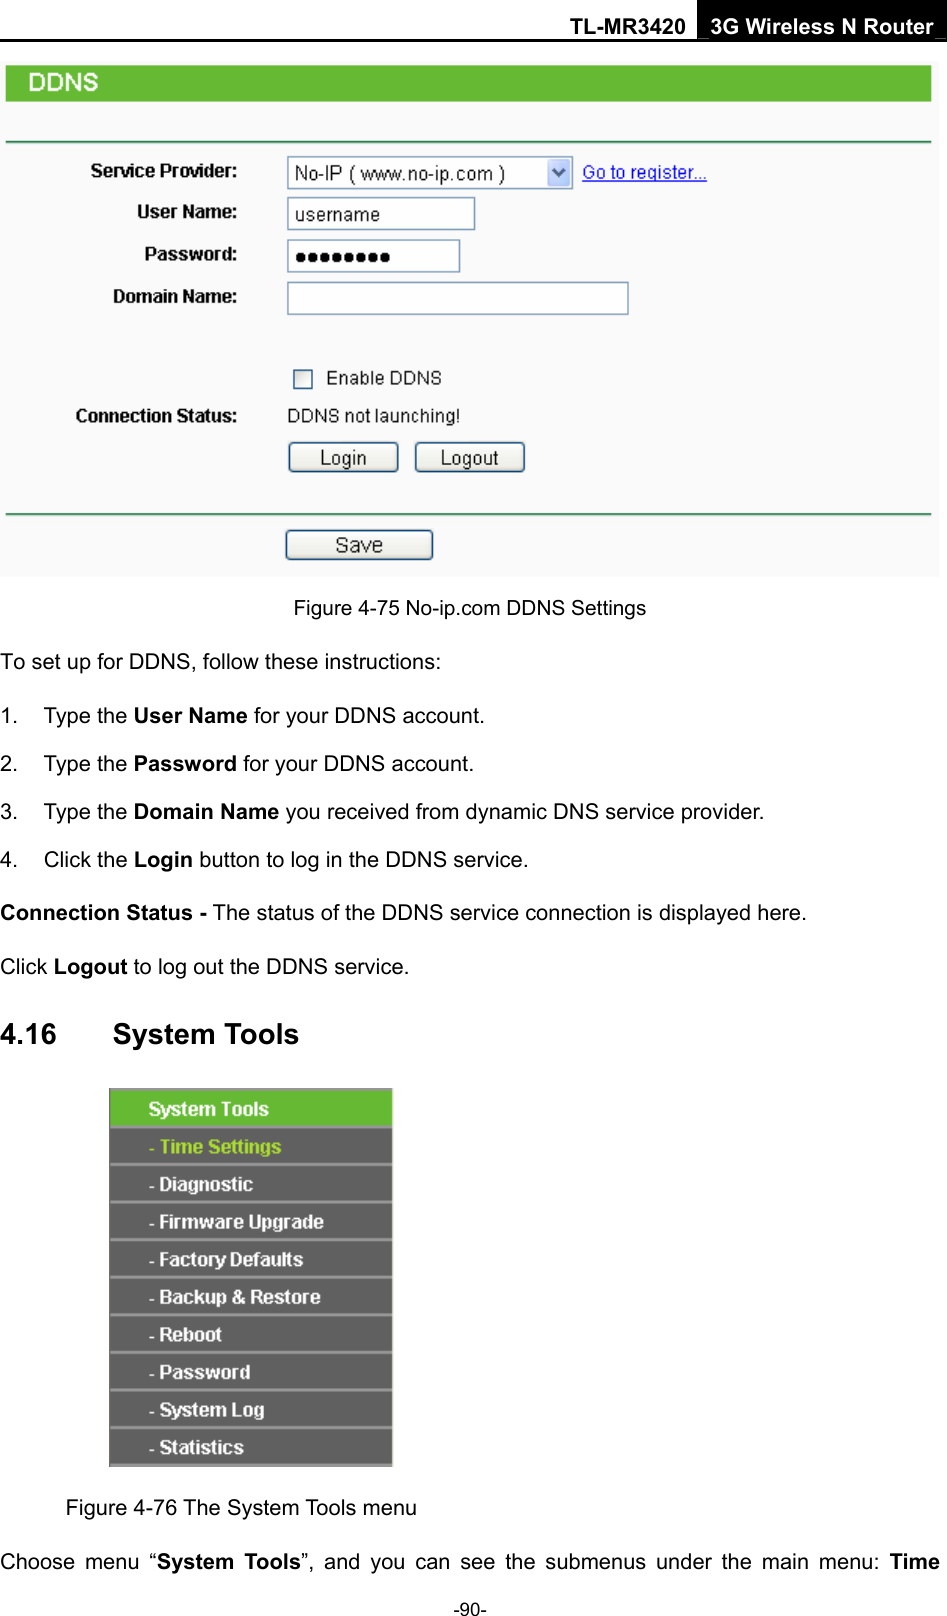 TL-MR3420 3G Wireless N Router -90-  Figure 4-75 No-ip.com DDNS Settings To set up for DDNS, follow these instructions: 1. Type the User Name for your DDNS account.   2. Type the Password for your DDNS account.   3. Type the Domain Name you received from dynamic DNS service provider. 4. Click the Login button to log in the DDNS service. Connection Status - The status of the DDNS service connection is displayed here. Click Logout to log out the DDNS service. 4.16  System Tools  Figure 4-76 The System Tools menu Choose menu “System Tools”, and you can see the submenus under the main menu: Time 